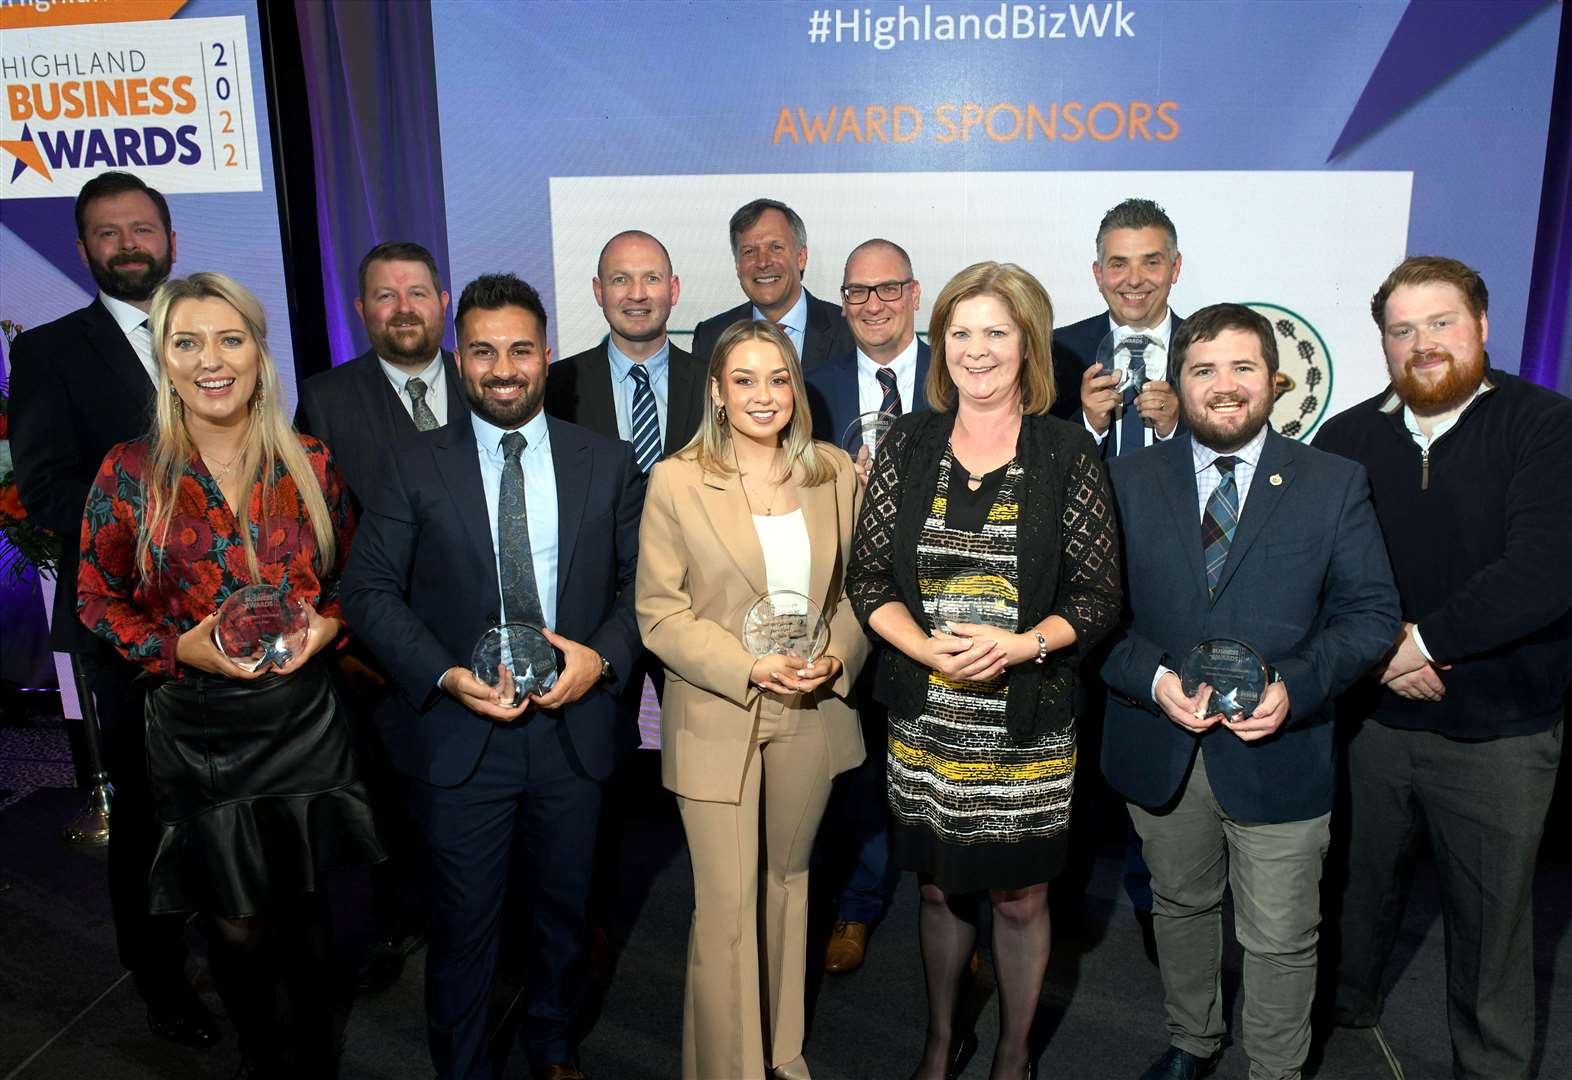 Return of Highland Business Week proved to be a hit